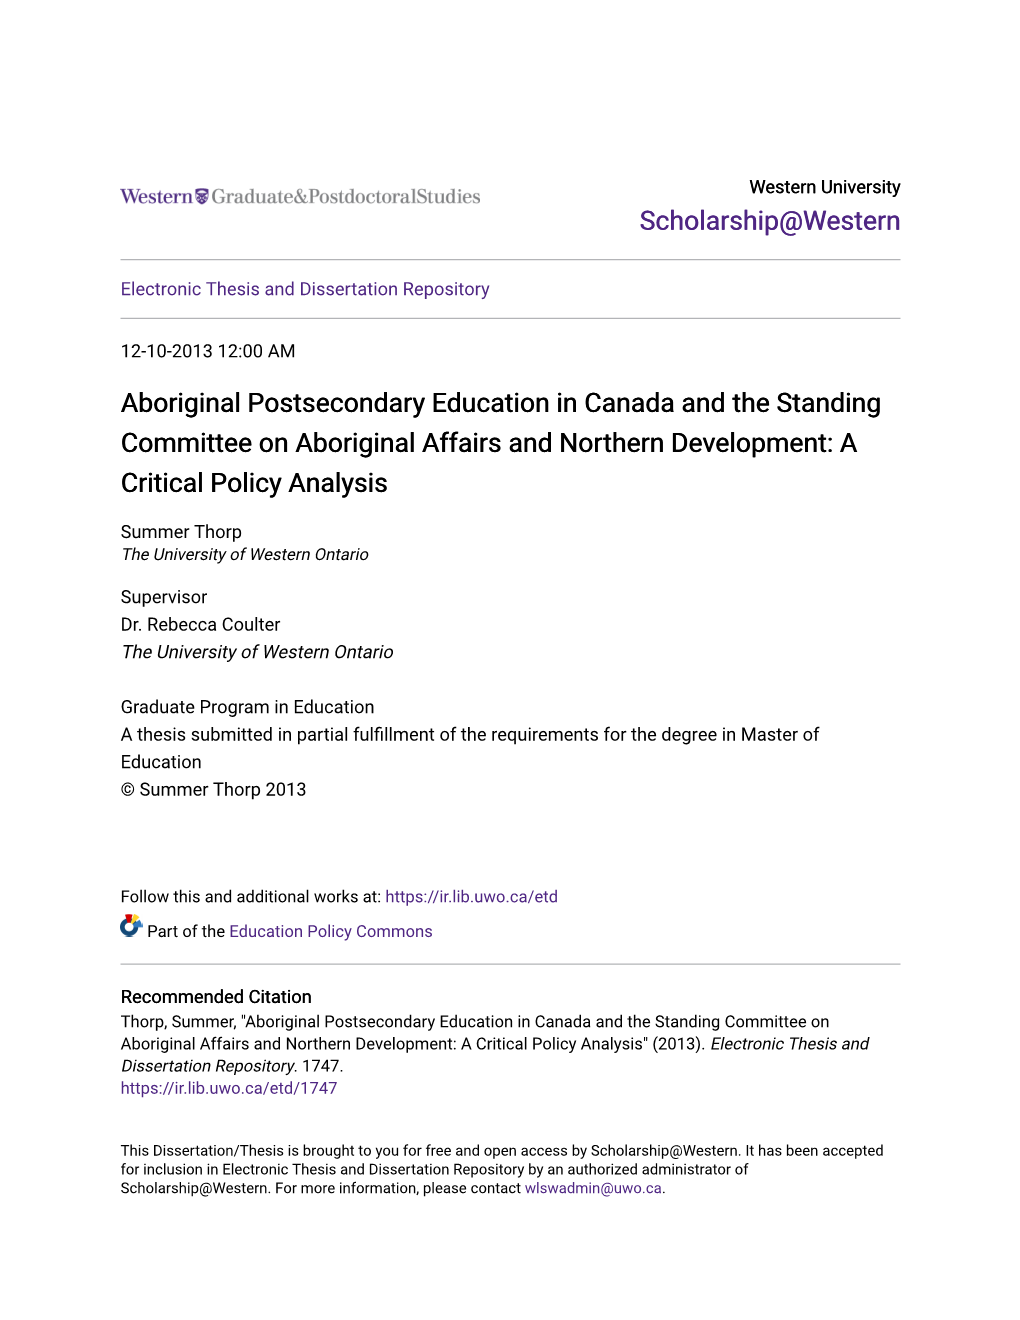 Aboriginal Postsecondary Education in Canada and the Standing Committee on Aboriginal Affairs and Northern Development: a Critical Policy Analysis